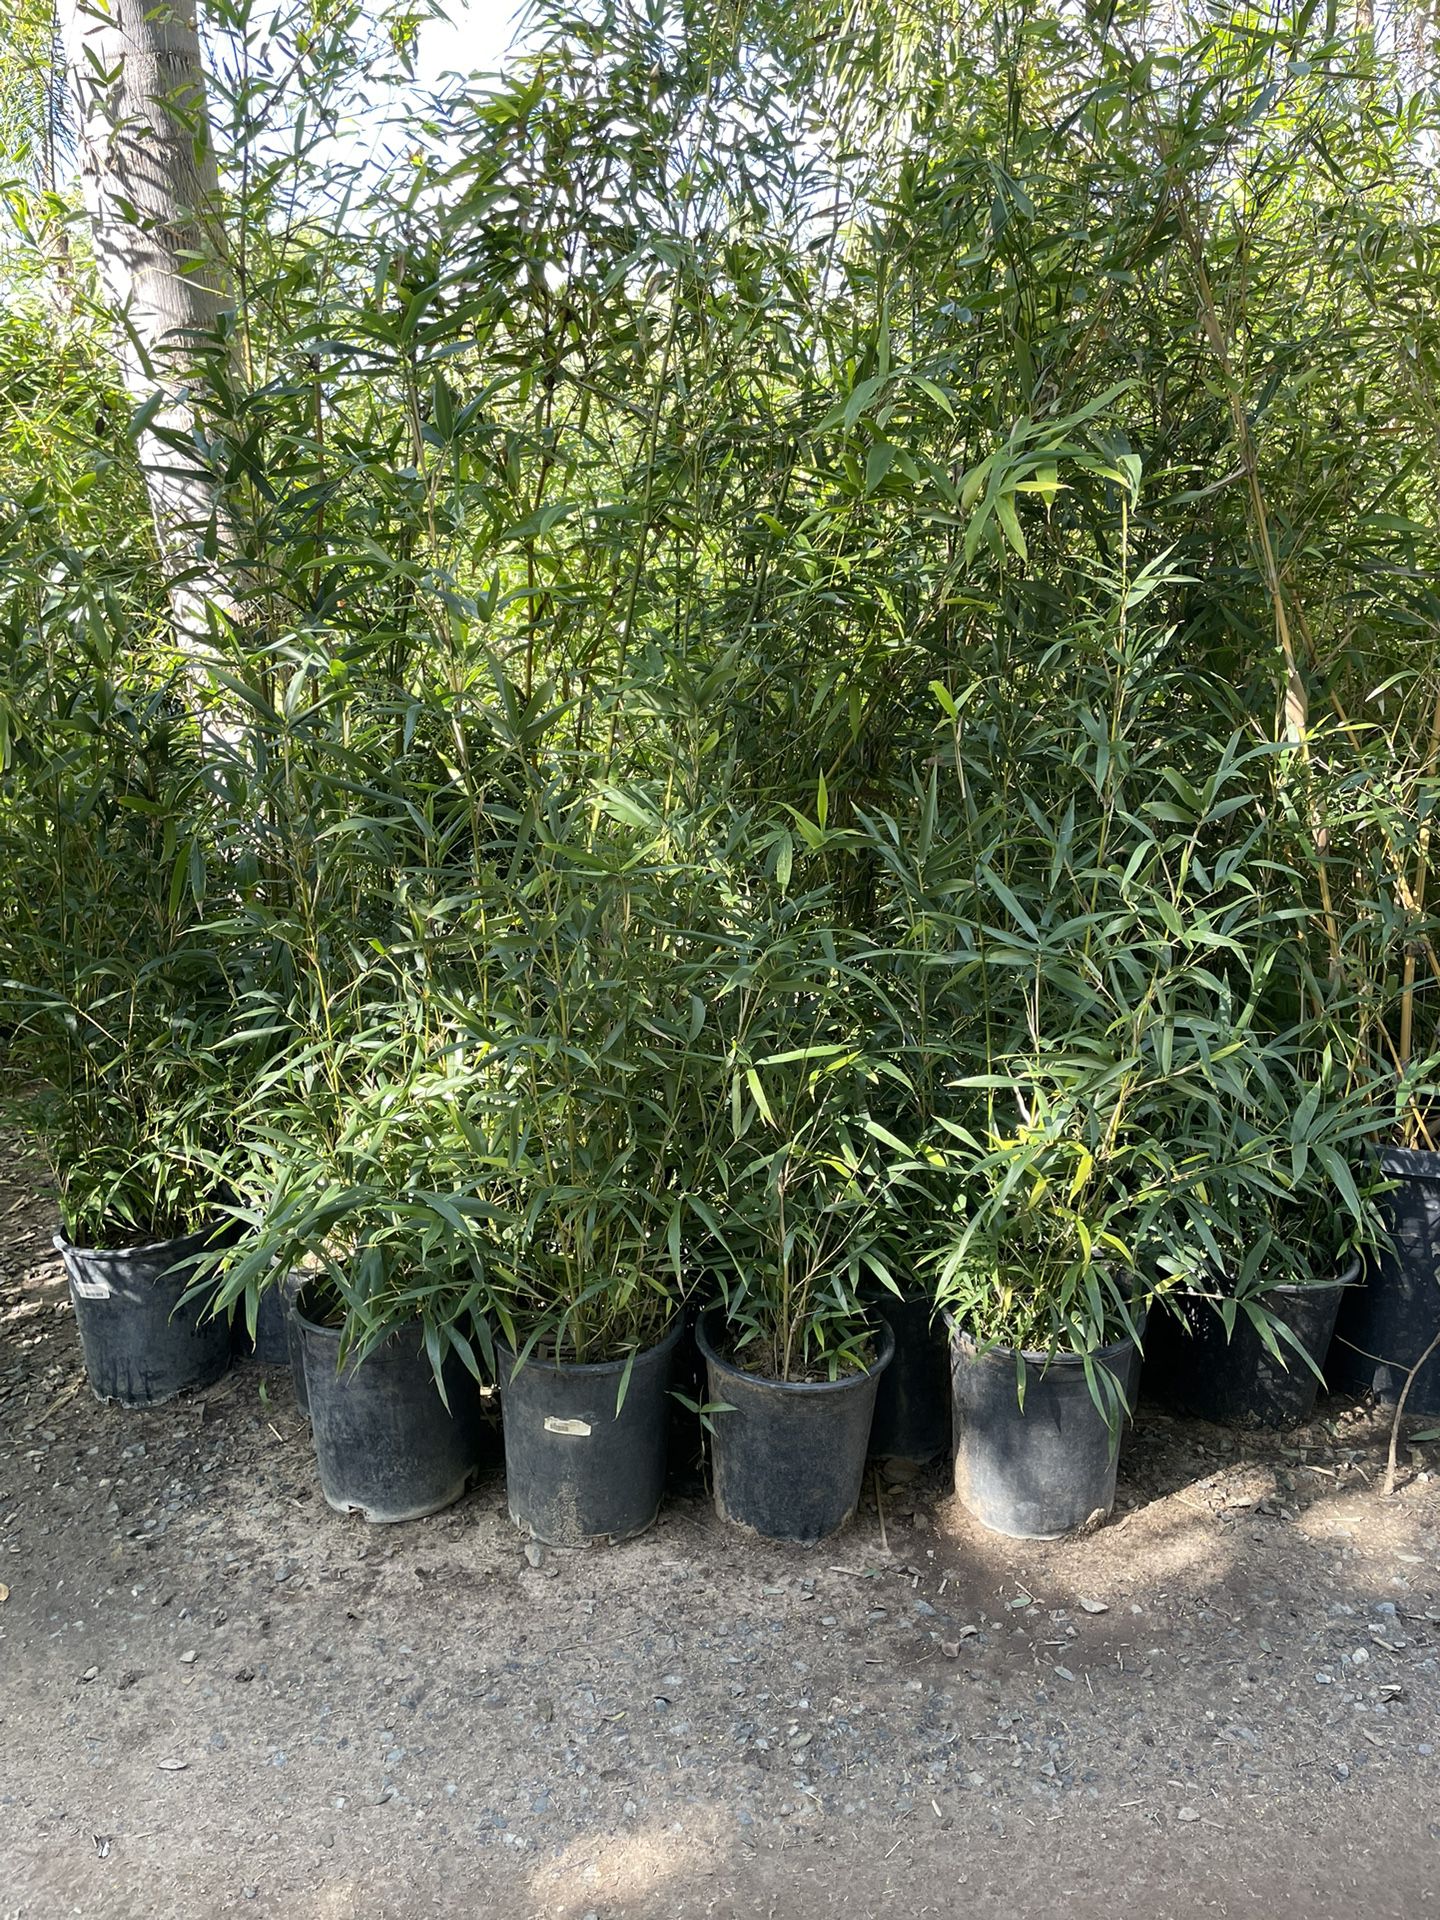 5 Gallon Size - Bamboo- Approximately 4 - 6 Feet Tall 